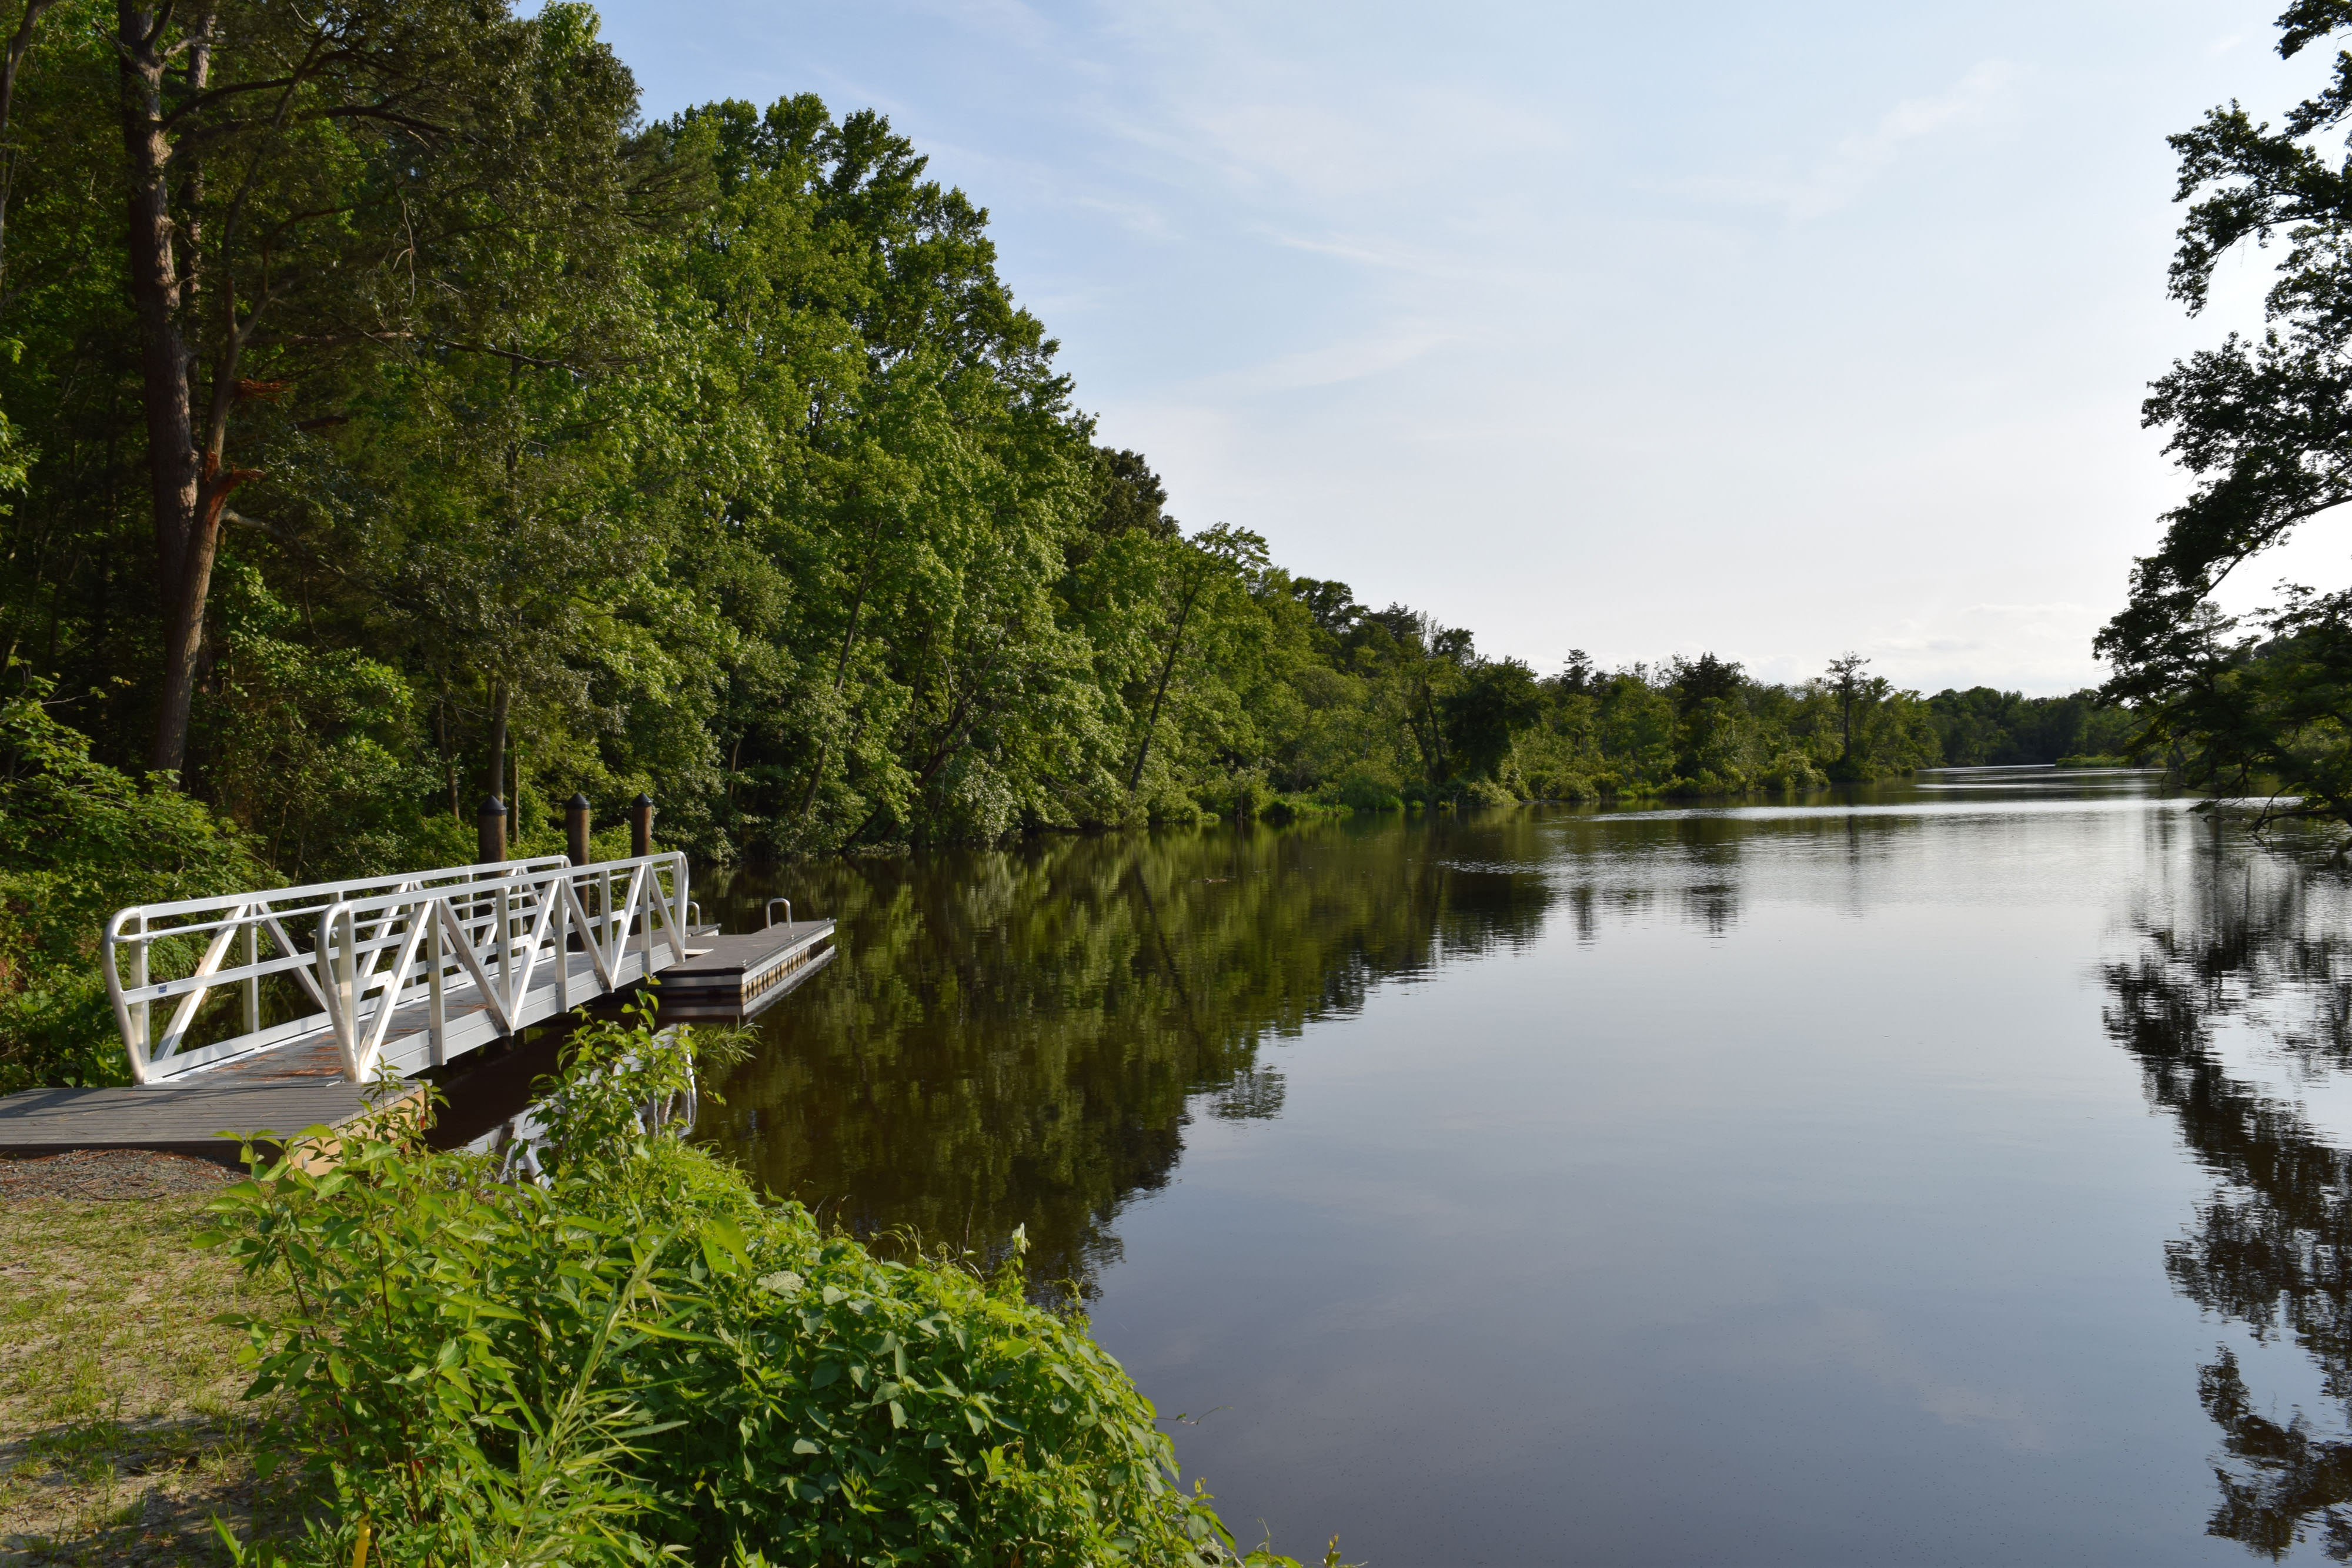 A short dock floats at the edge of the Broadkill River. The still surface of the water reflects the tall leafy green trees that line the river's edge.